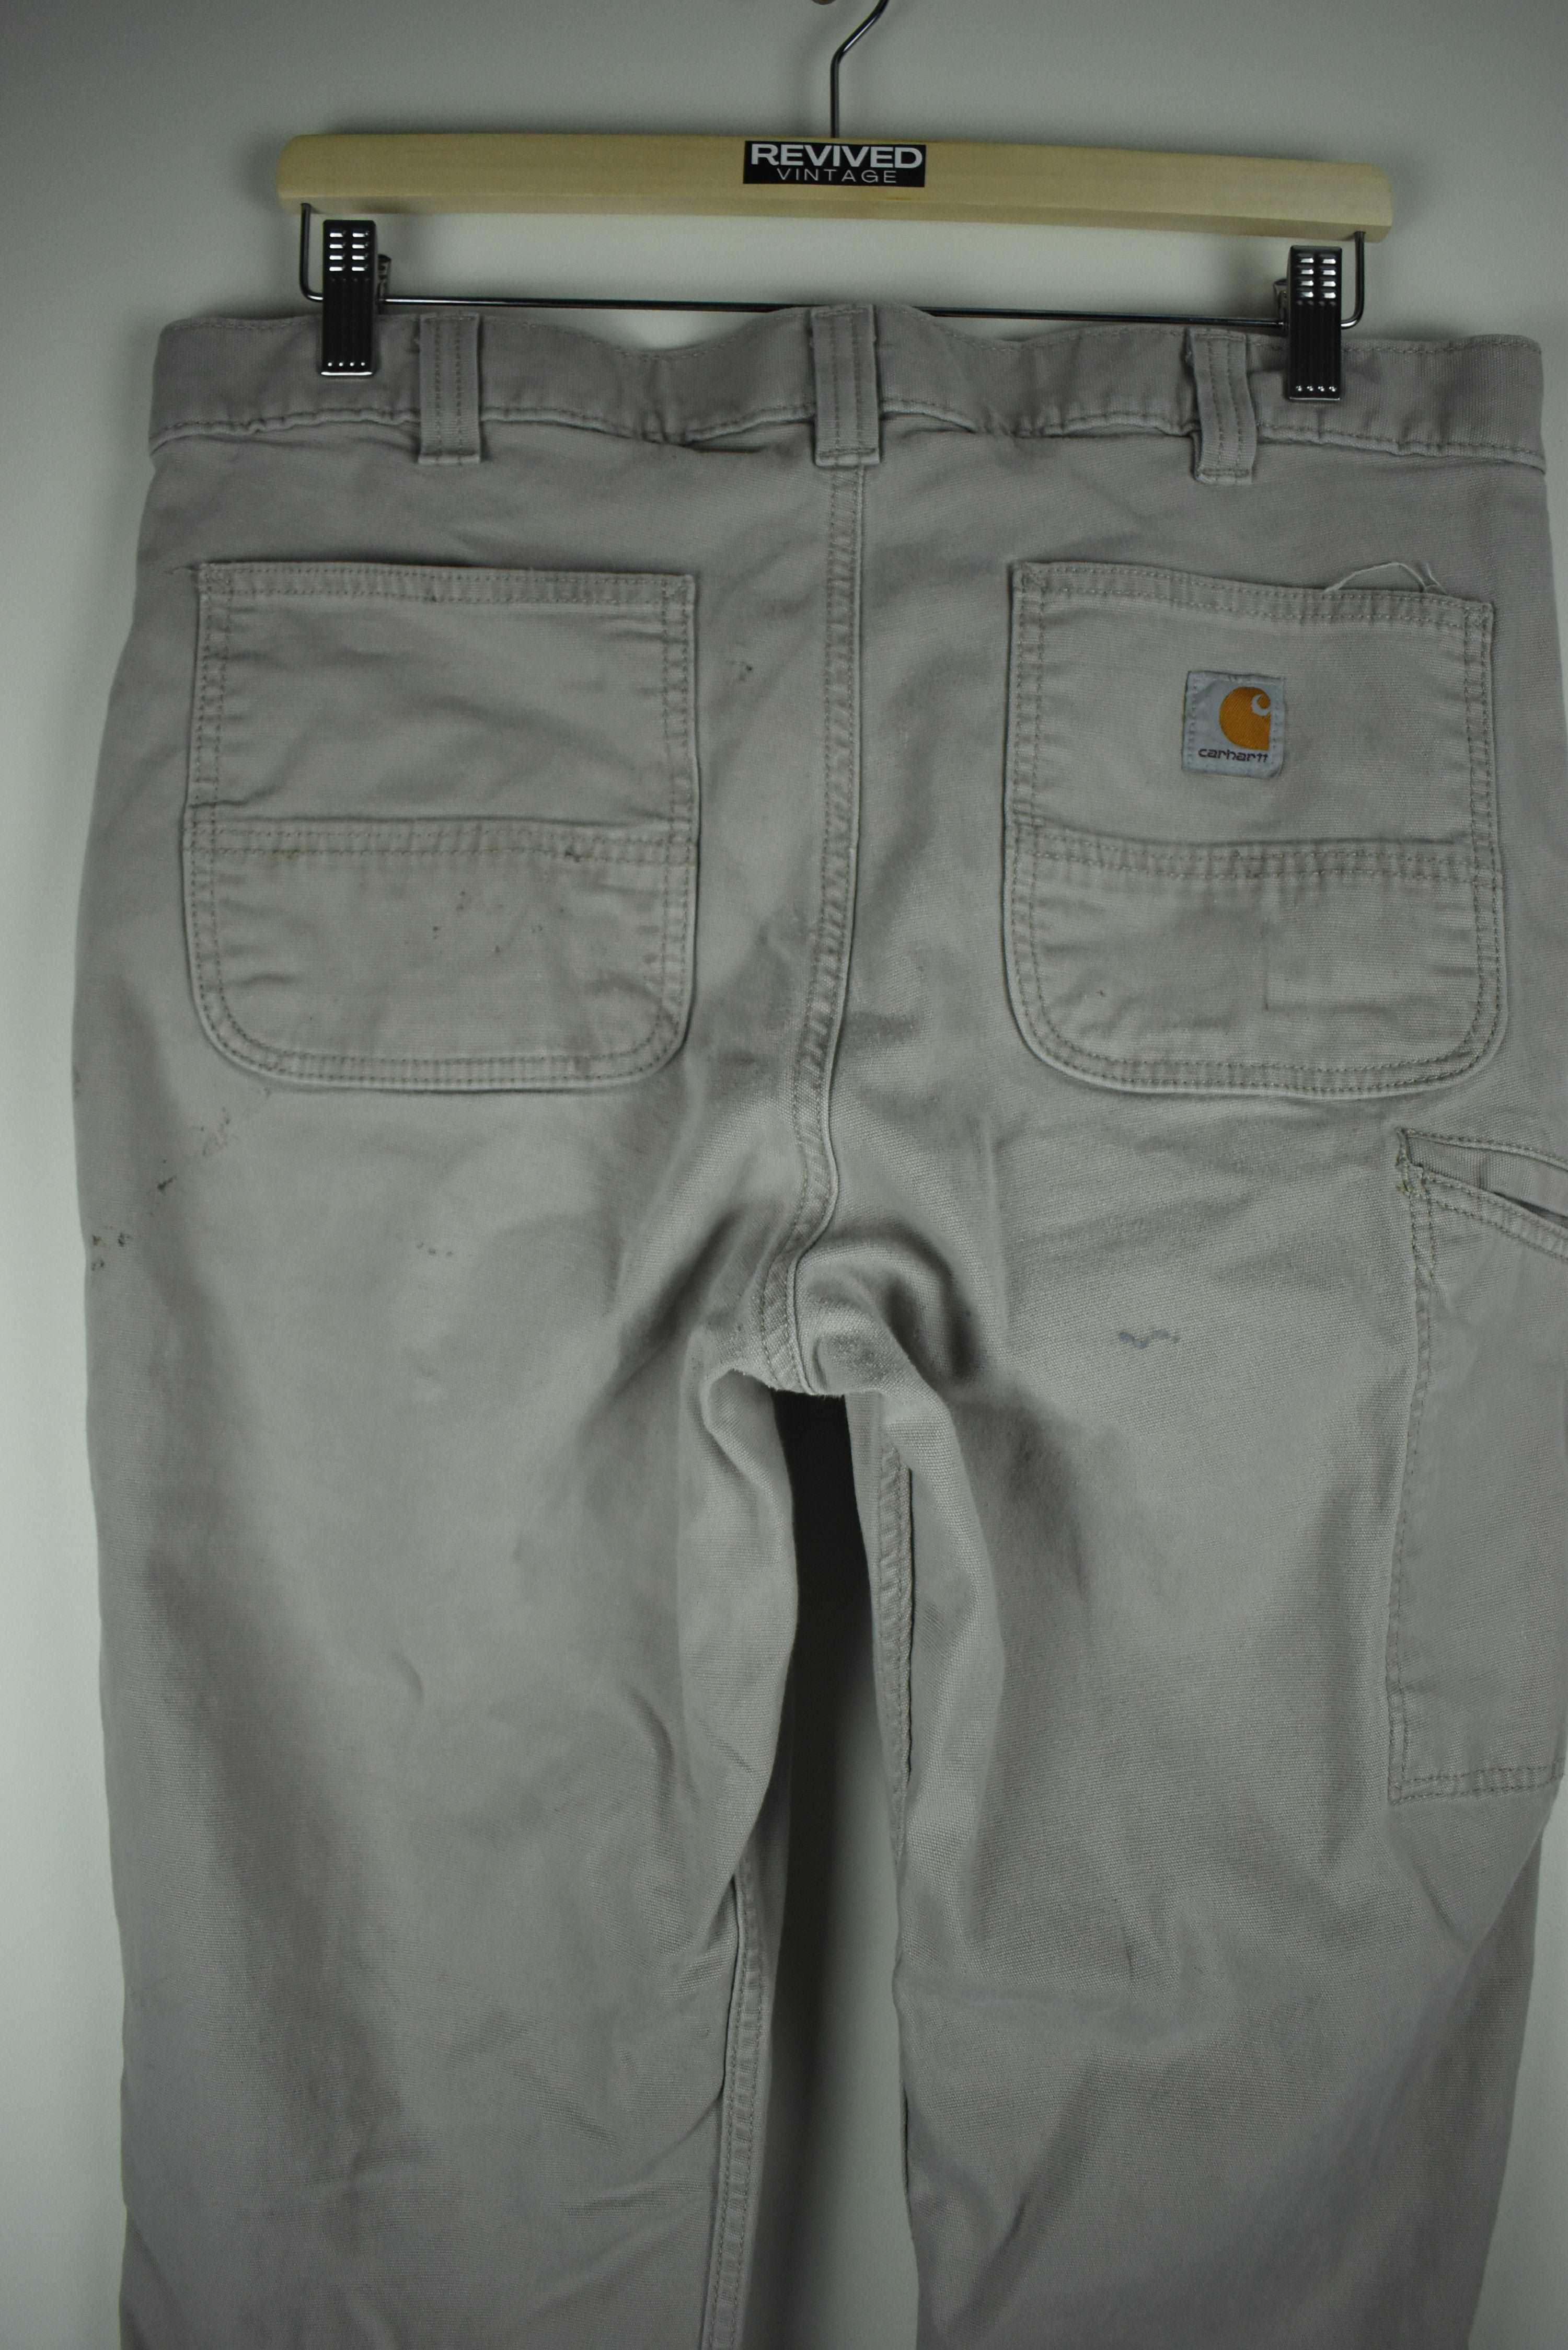 Vintage Carhartt Classic Workpants Relaxed Fit 36 x 30